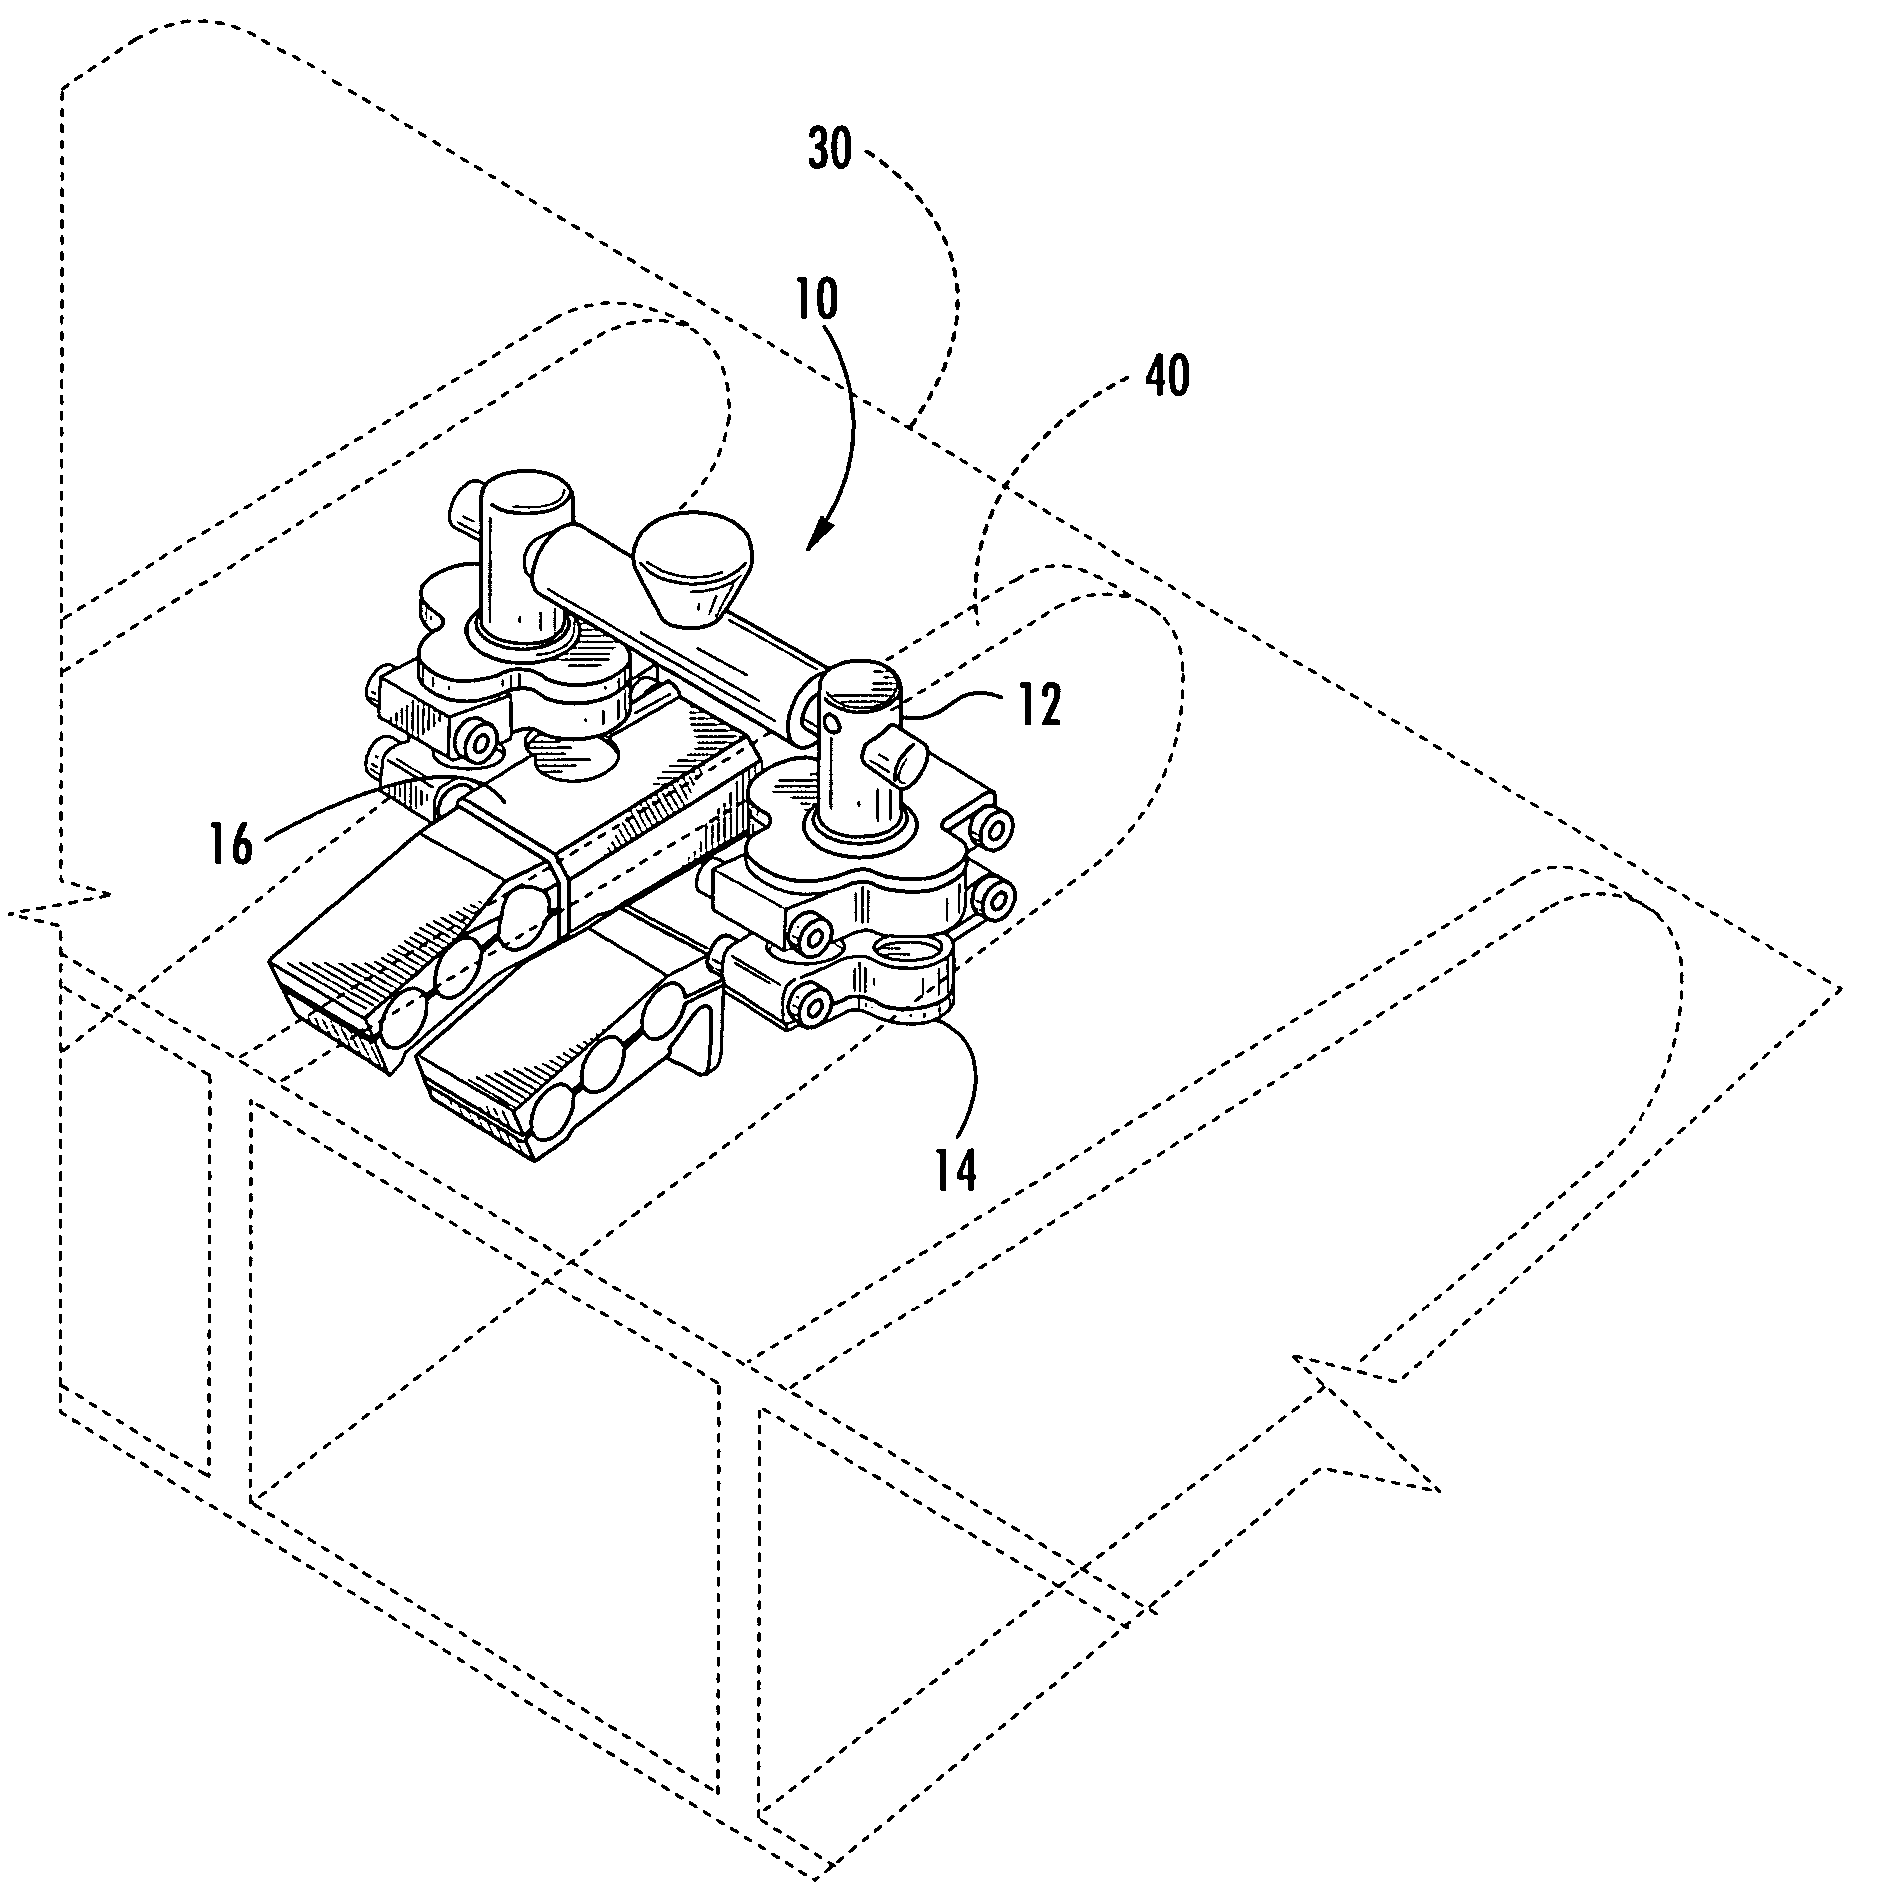 Non-destructive inspection device for inspecting limited-access features of a structure